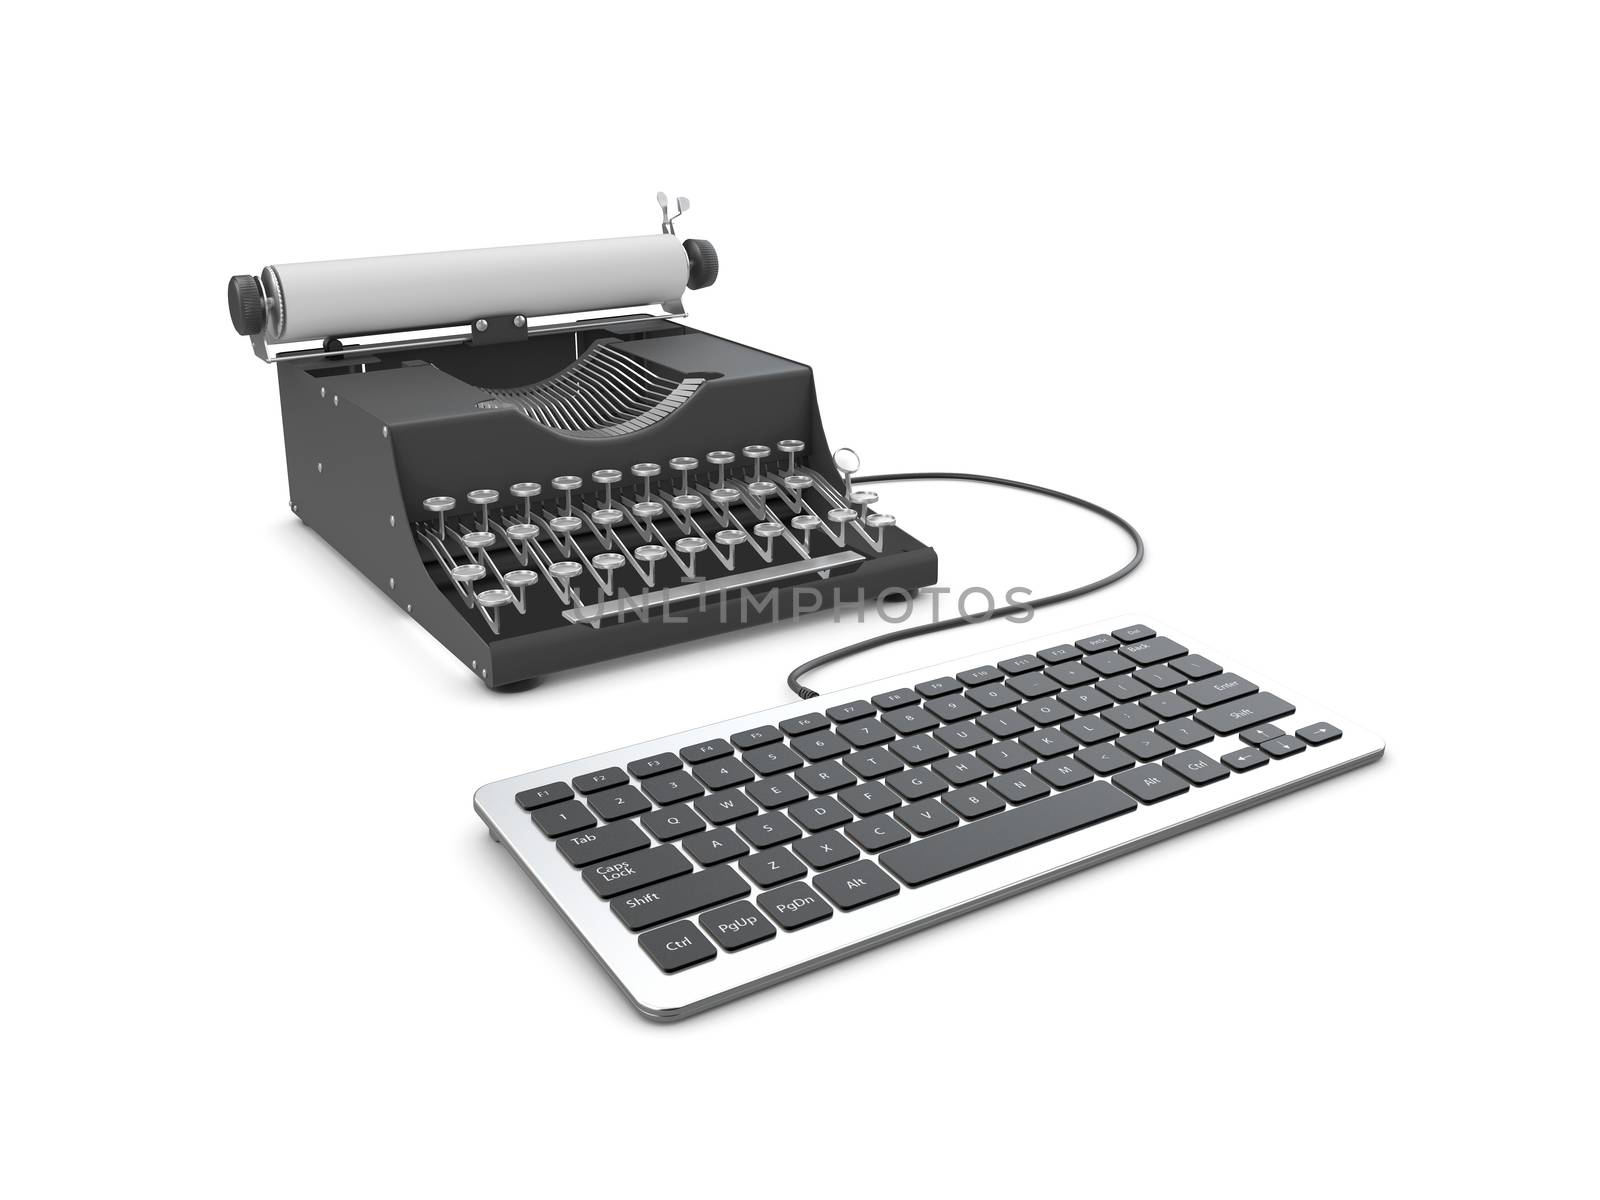 3d illustration of Old typewriter and keyboard. Concept of technology progress by tussik